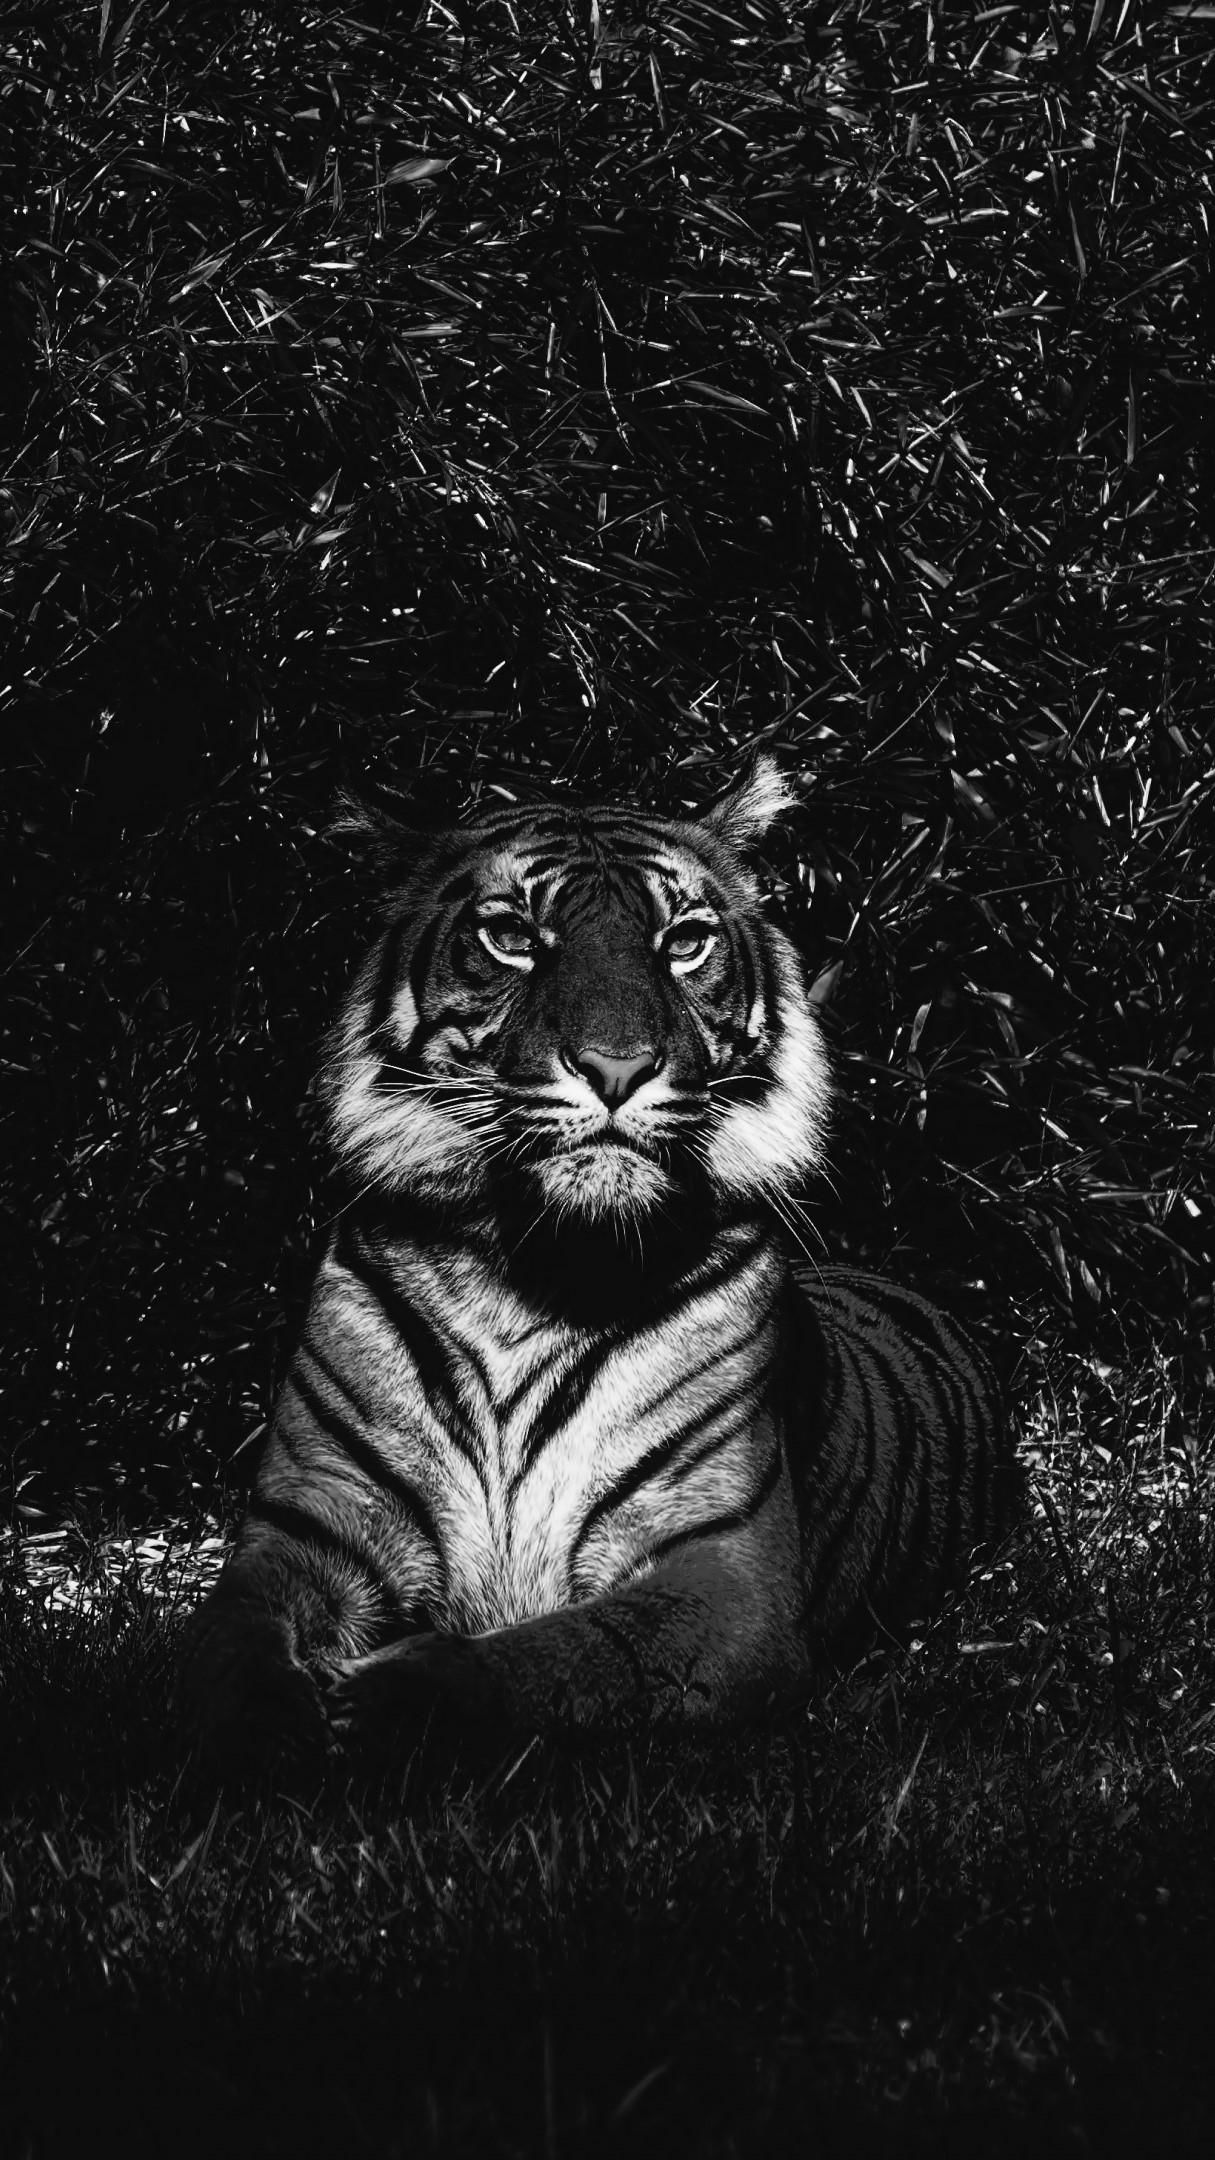 Tiger - Black and white photography wallpaper - backiee